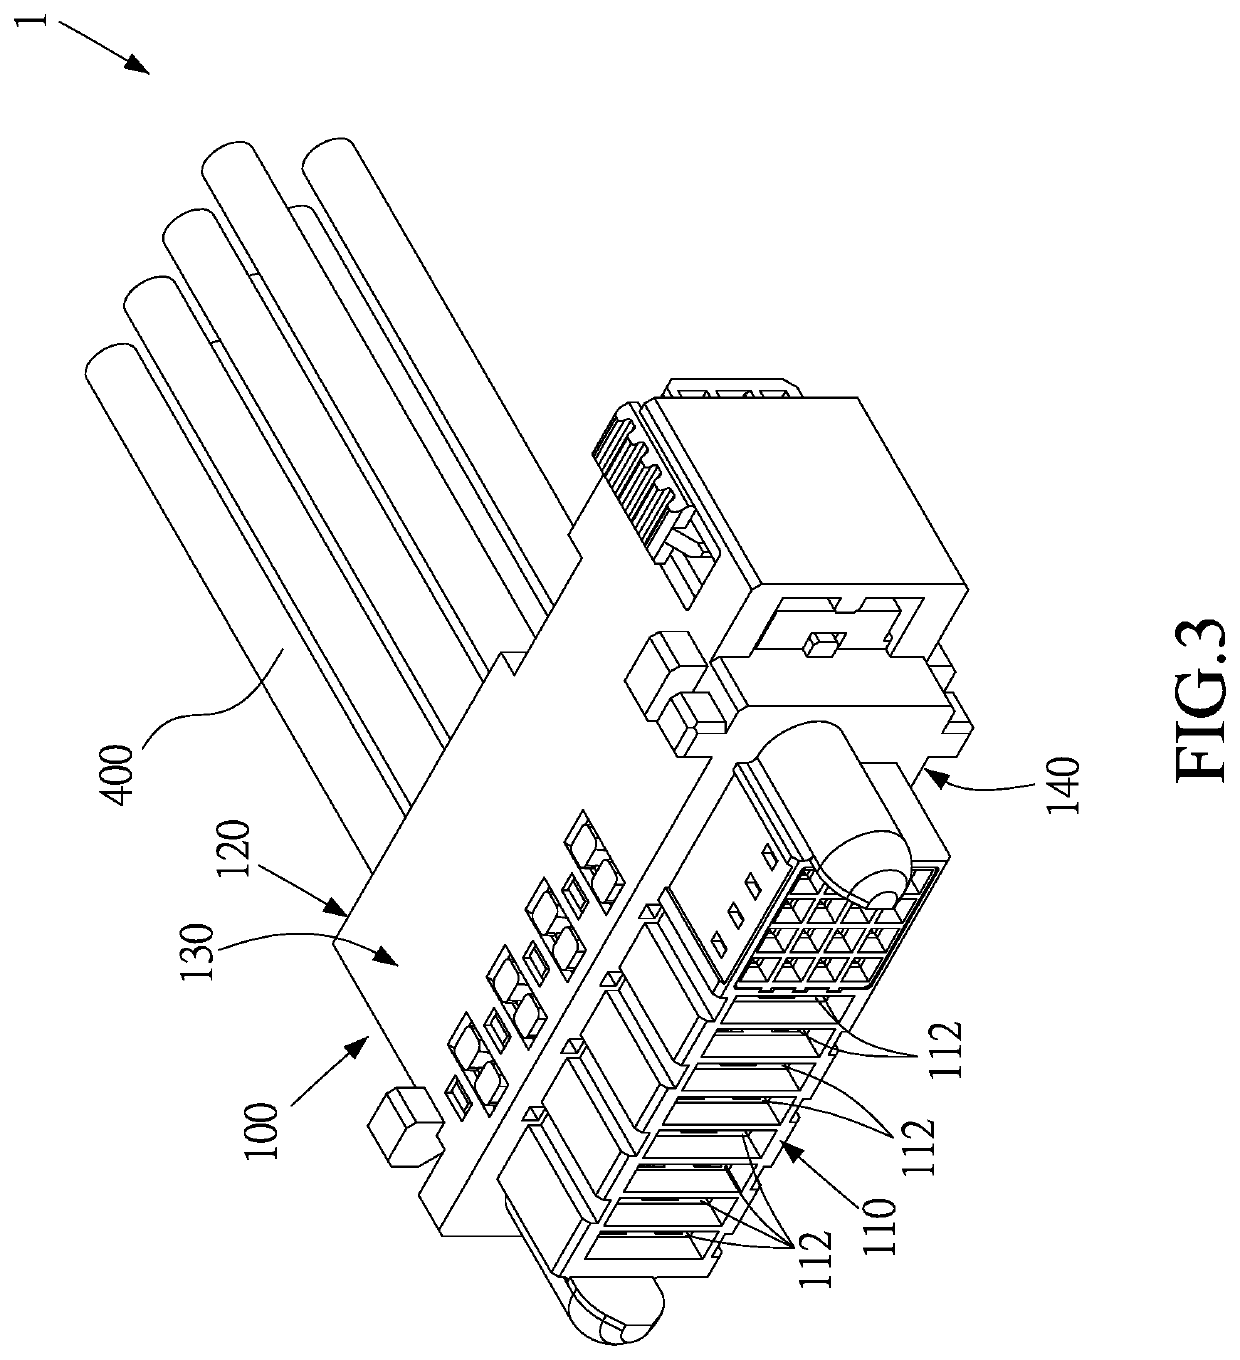 Electrical connector with reduce distance between electrical terminals